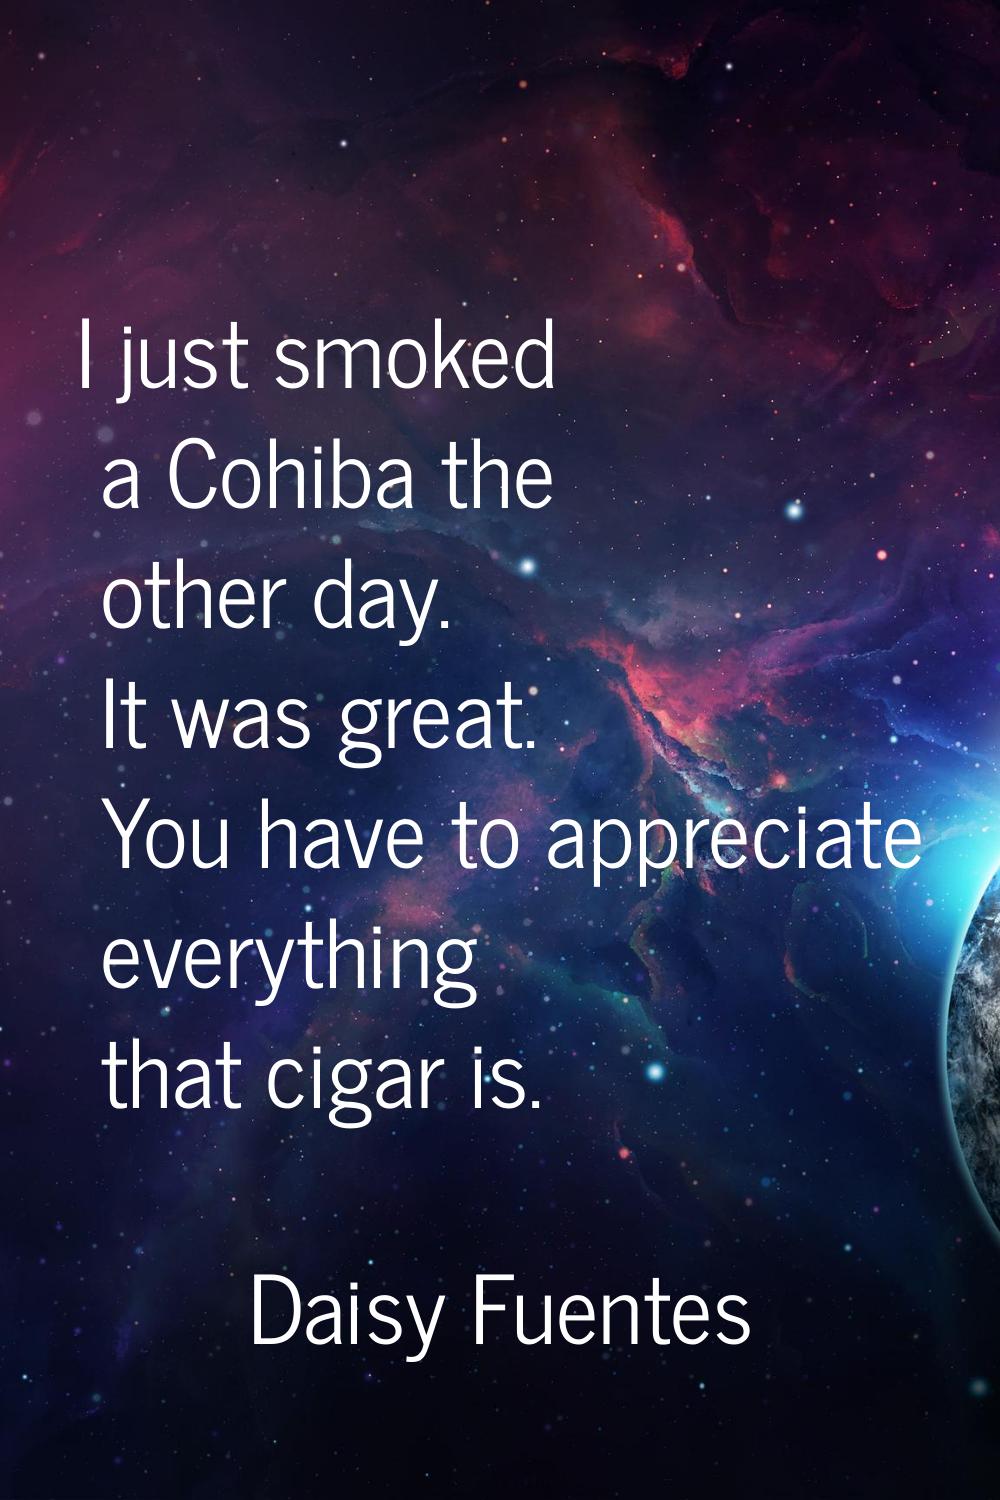 I just smoked a Cohiba the other day. It was great. You have to appreciate everything that cigar is